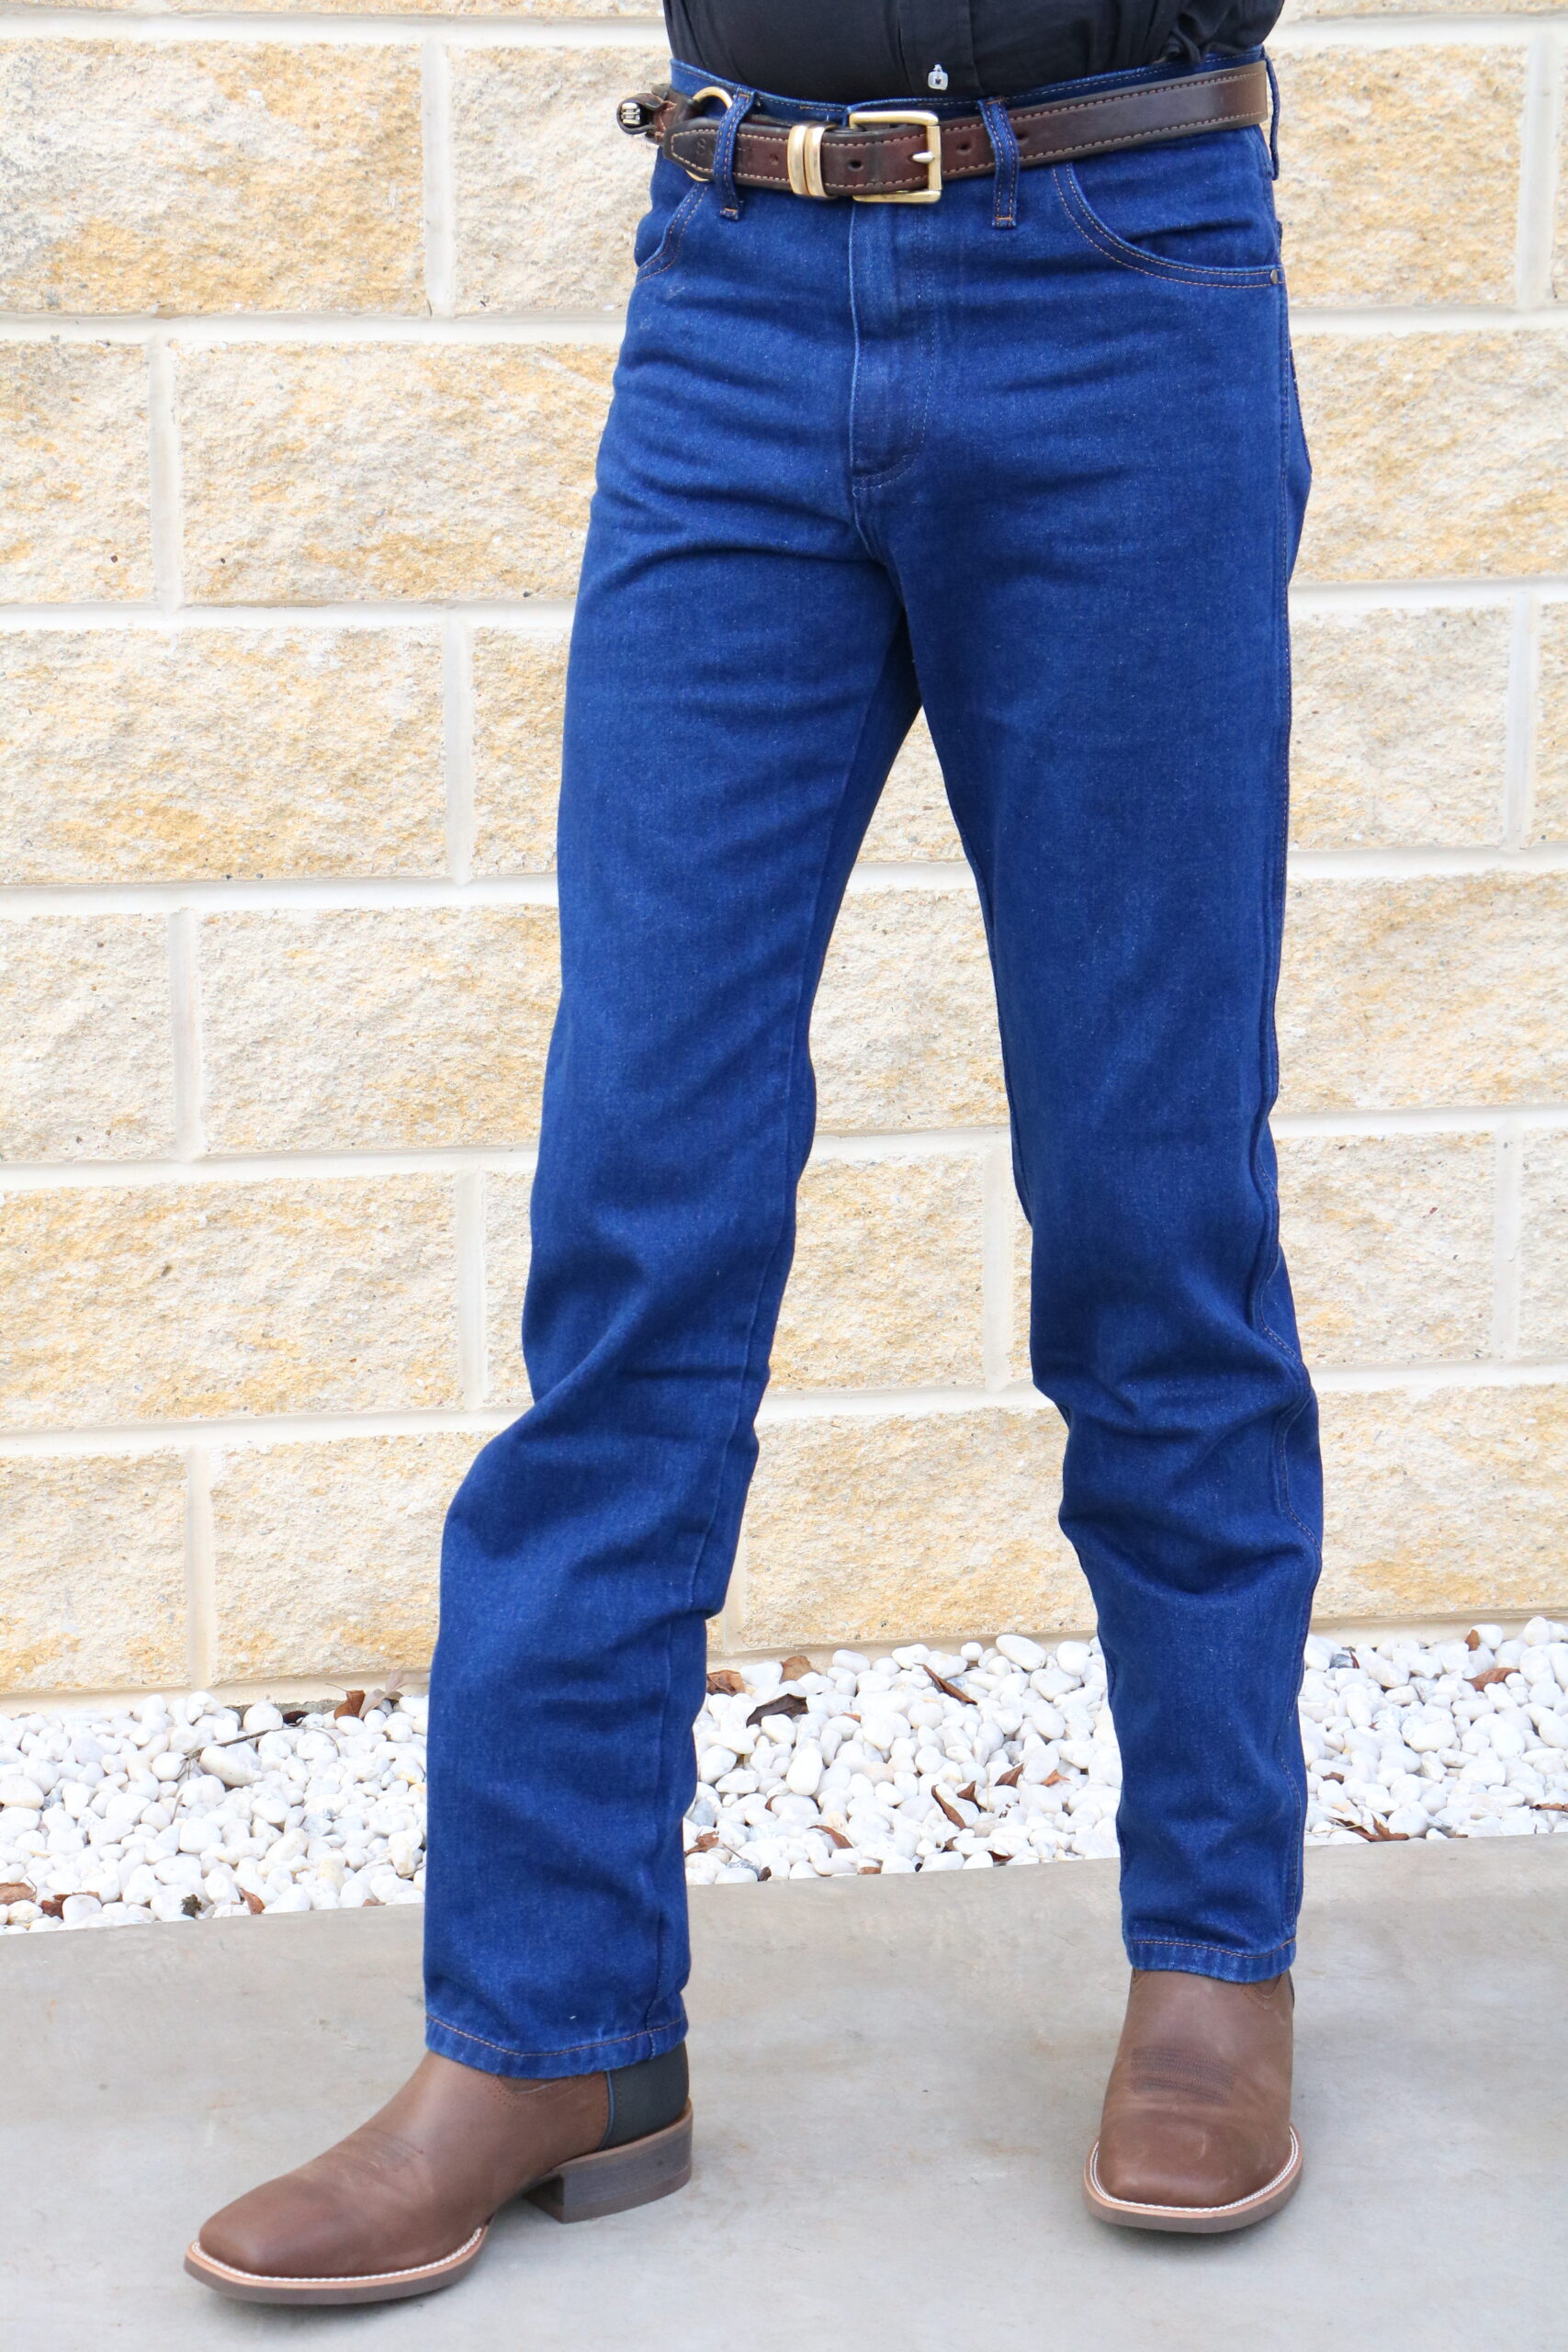 Newmarket’s Town & Country Mens “BLUE” Label Jean